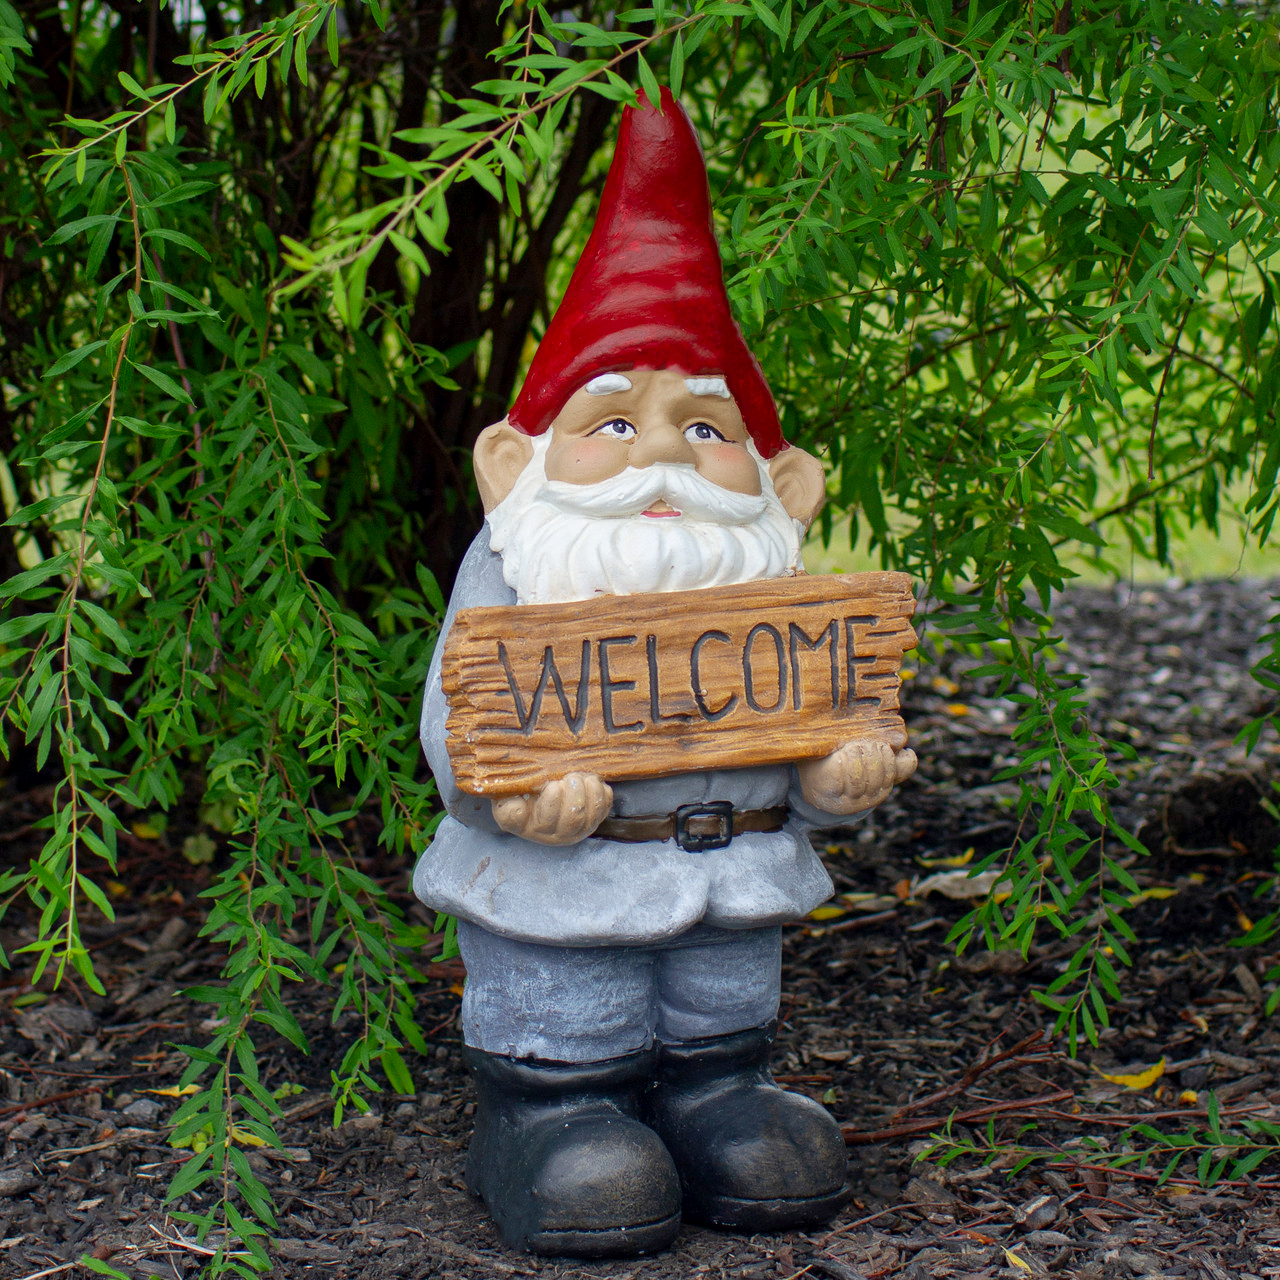 standing garden gnome holding Welcome sign